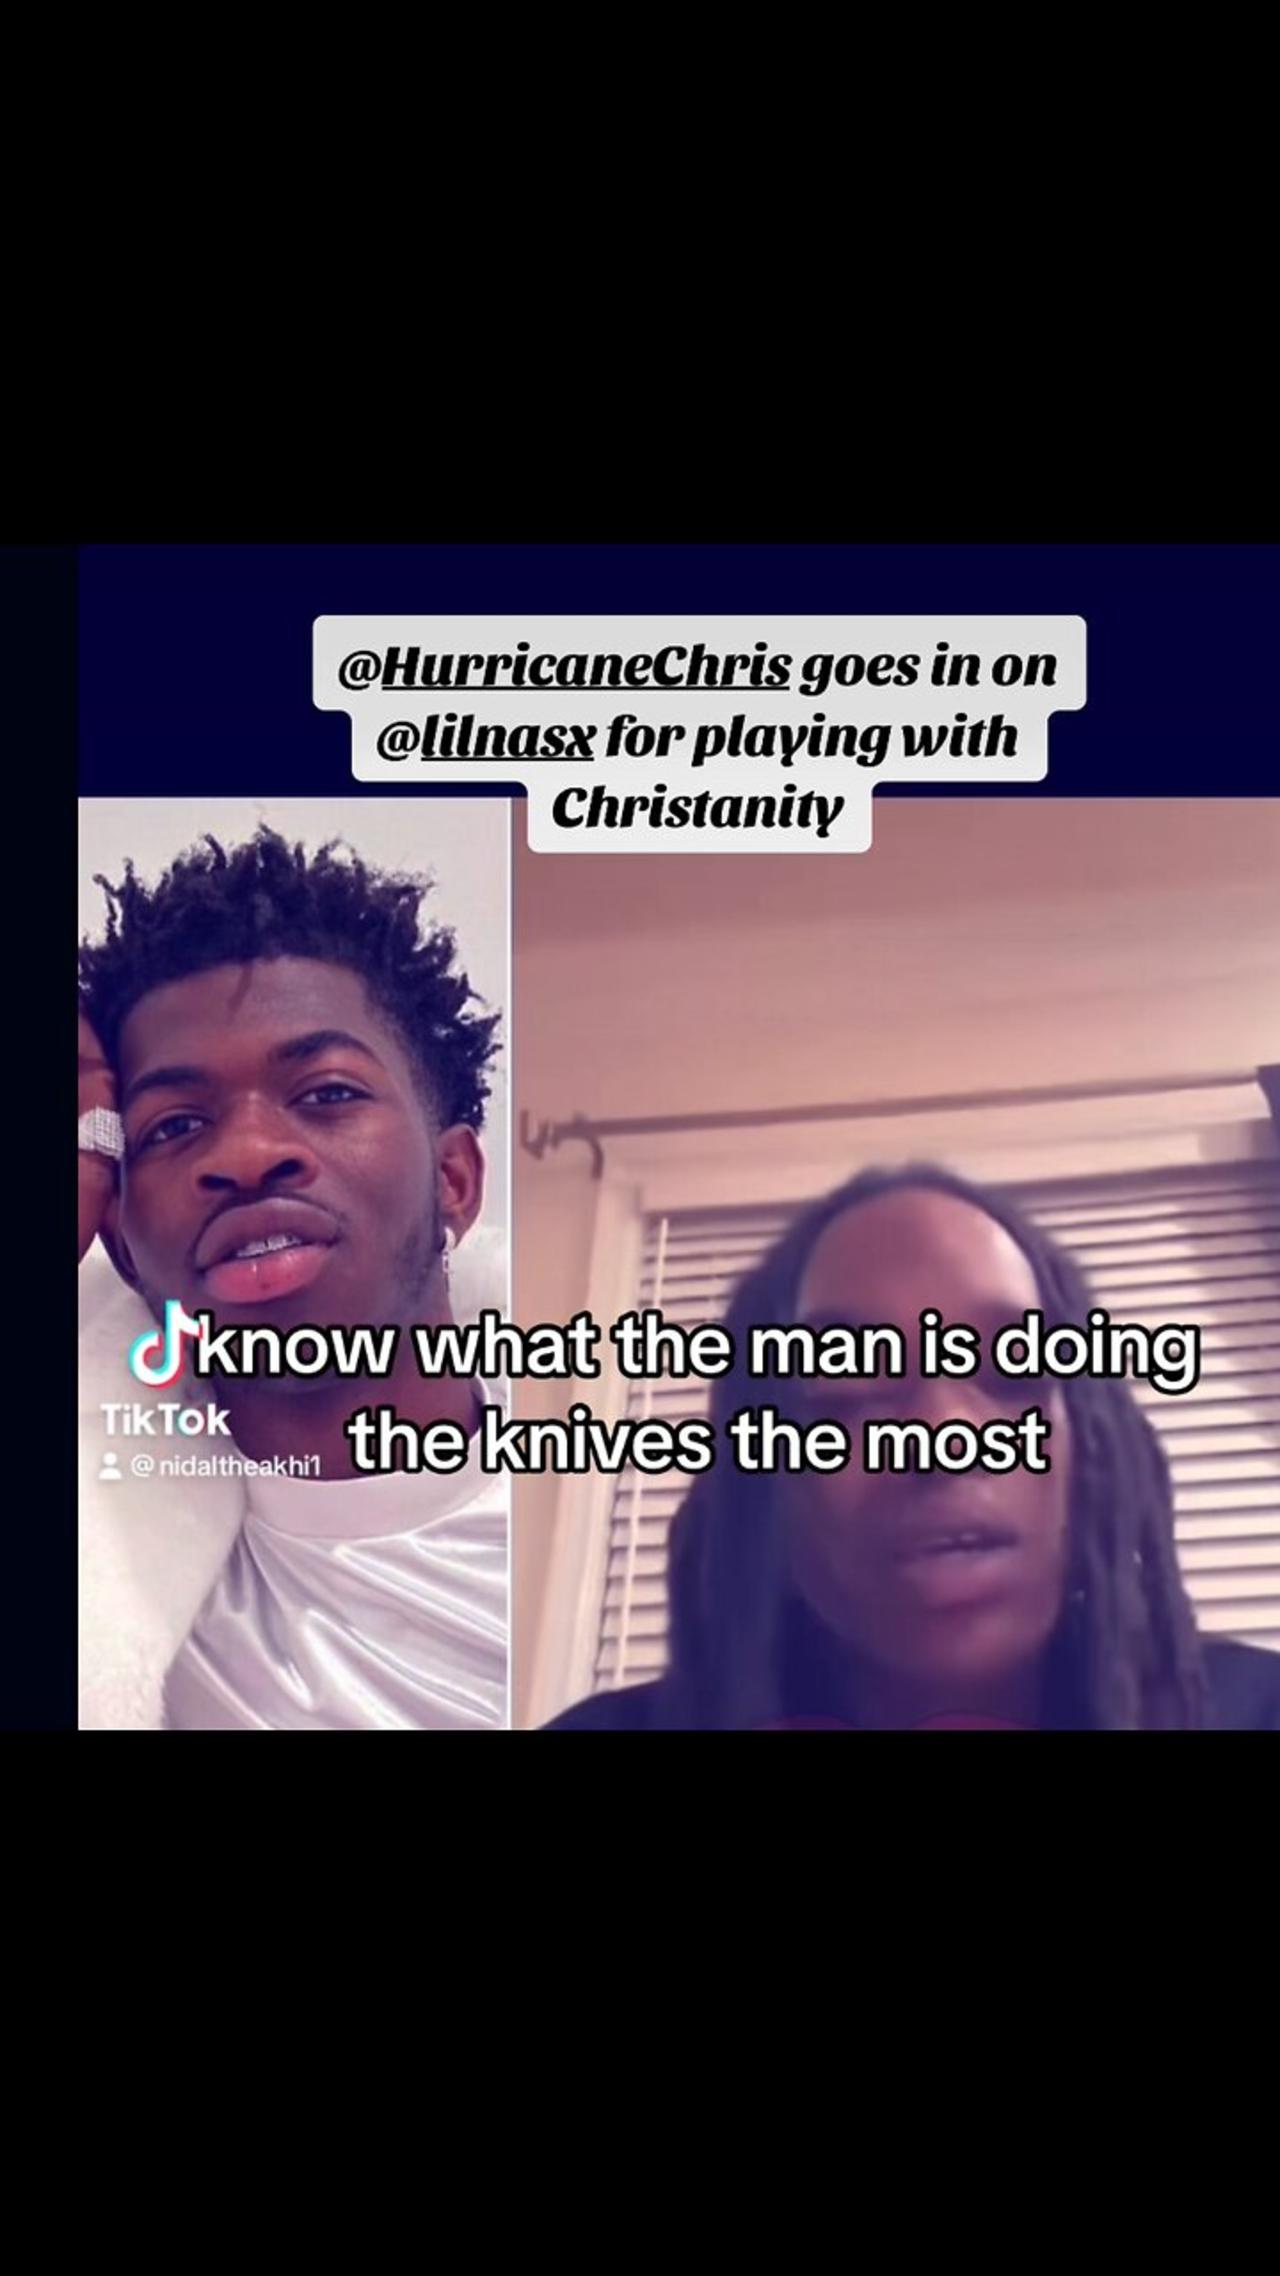 Hurricane Chris goes at Lil Nas X for disrespecting christianity in his new music video